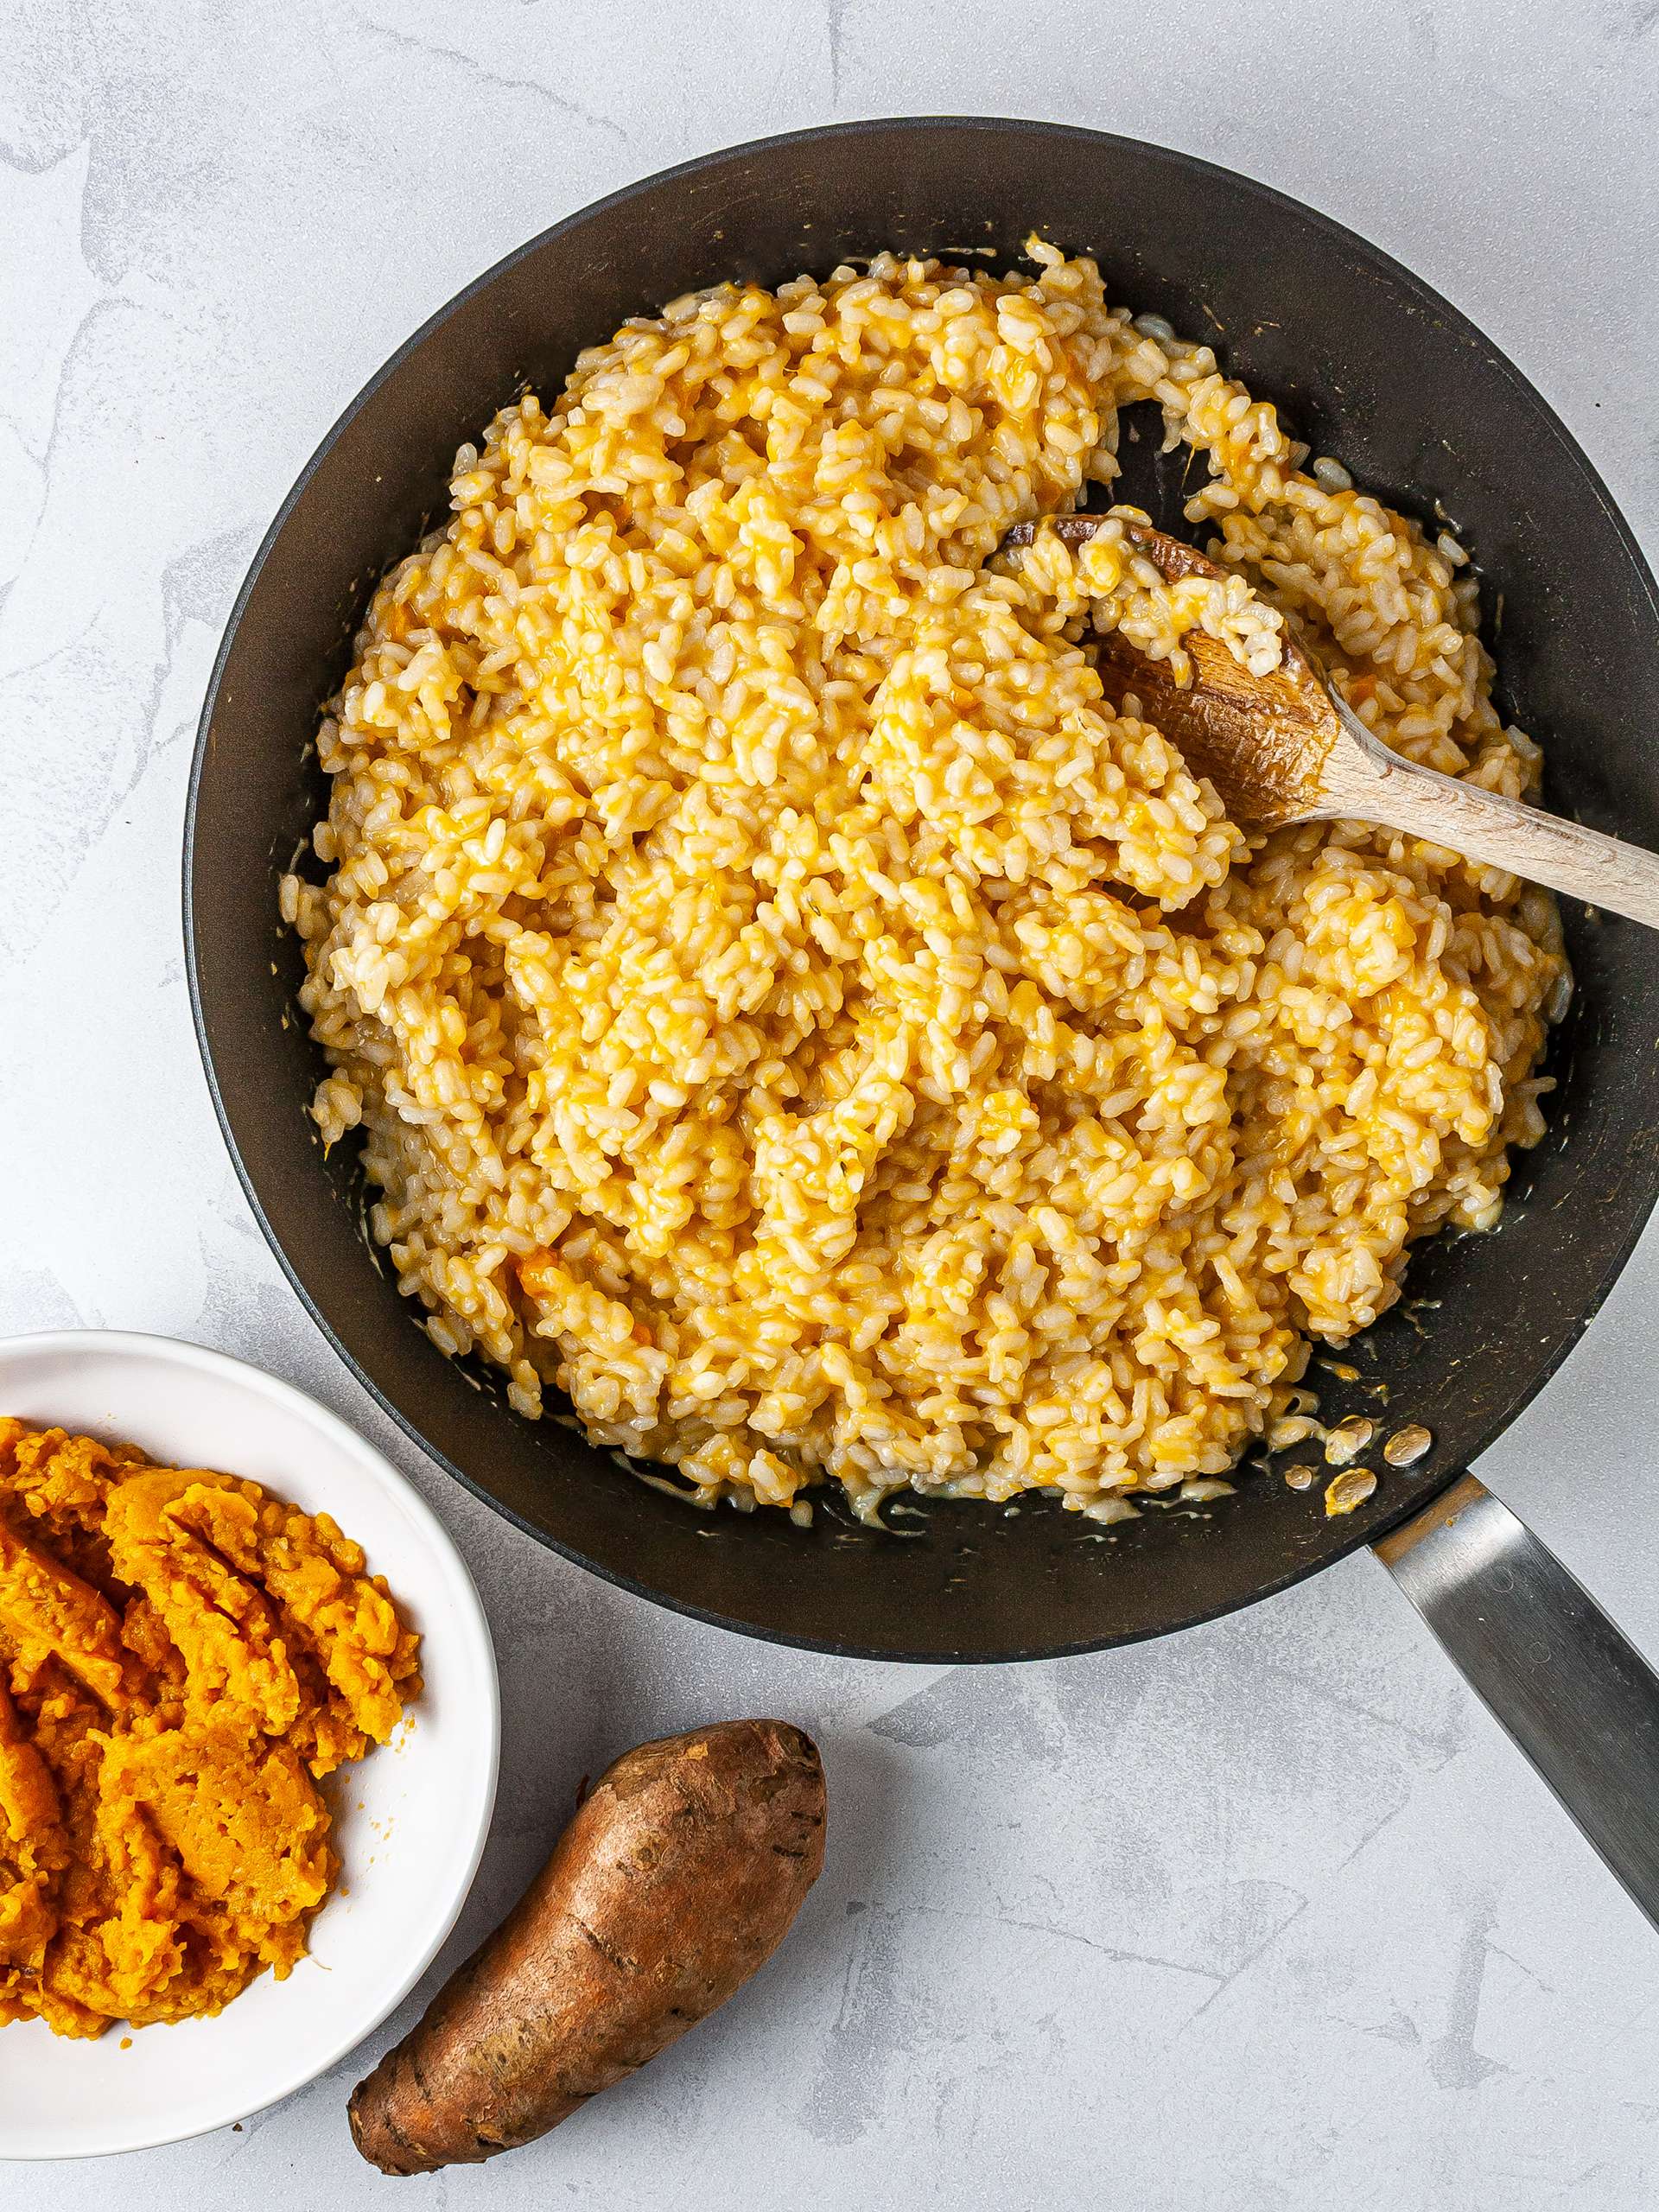 Mashed sweet potato added to the risotto rice.